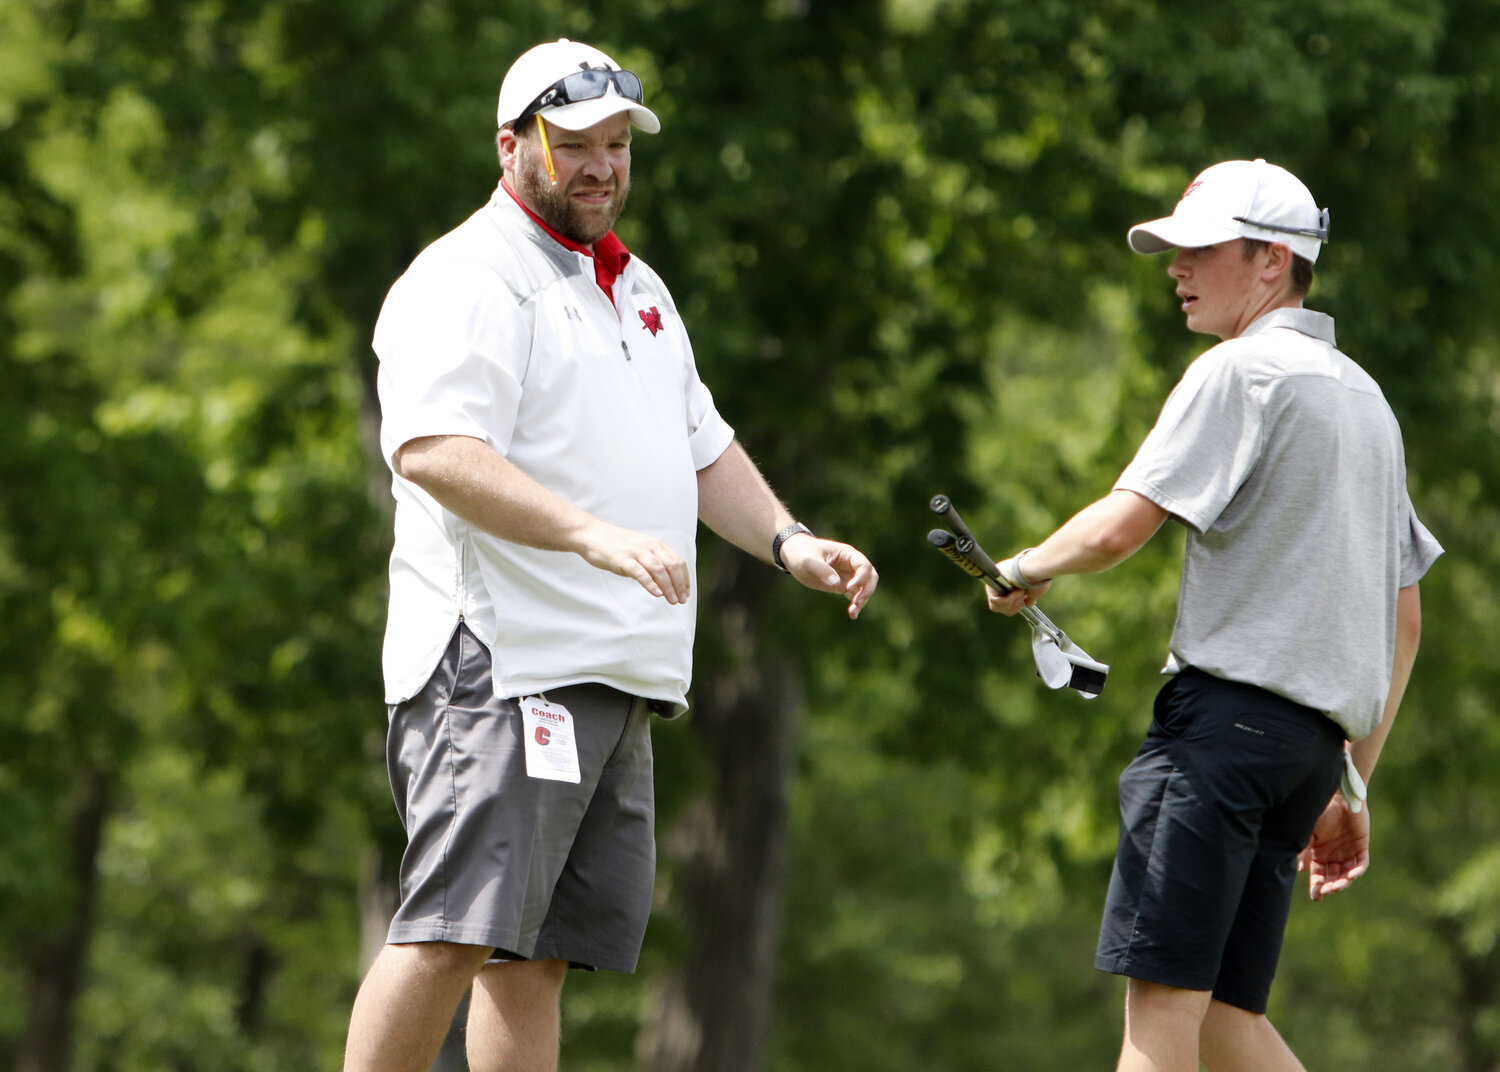 Warrenton head golf coach Aaron Jinkerson (left) hands a club to Owen Thompson after Thompson completed his round at the Golf Club of Wentzville.